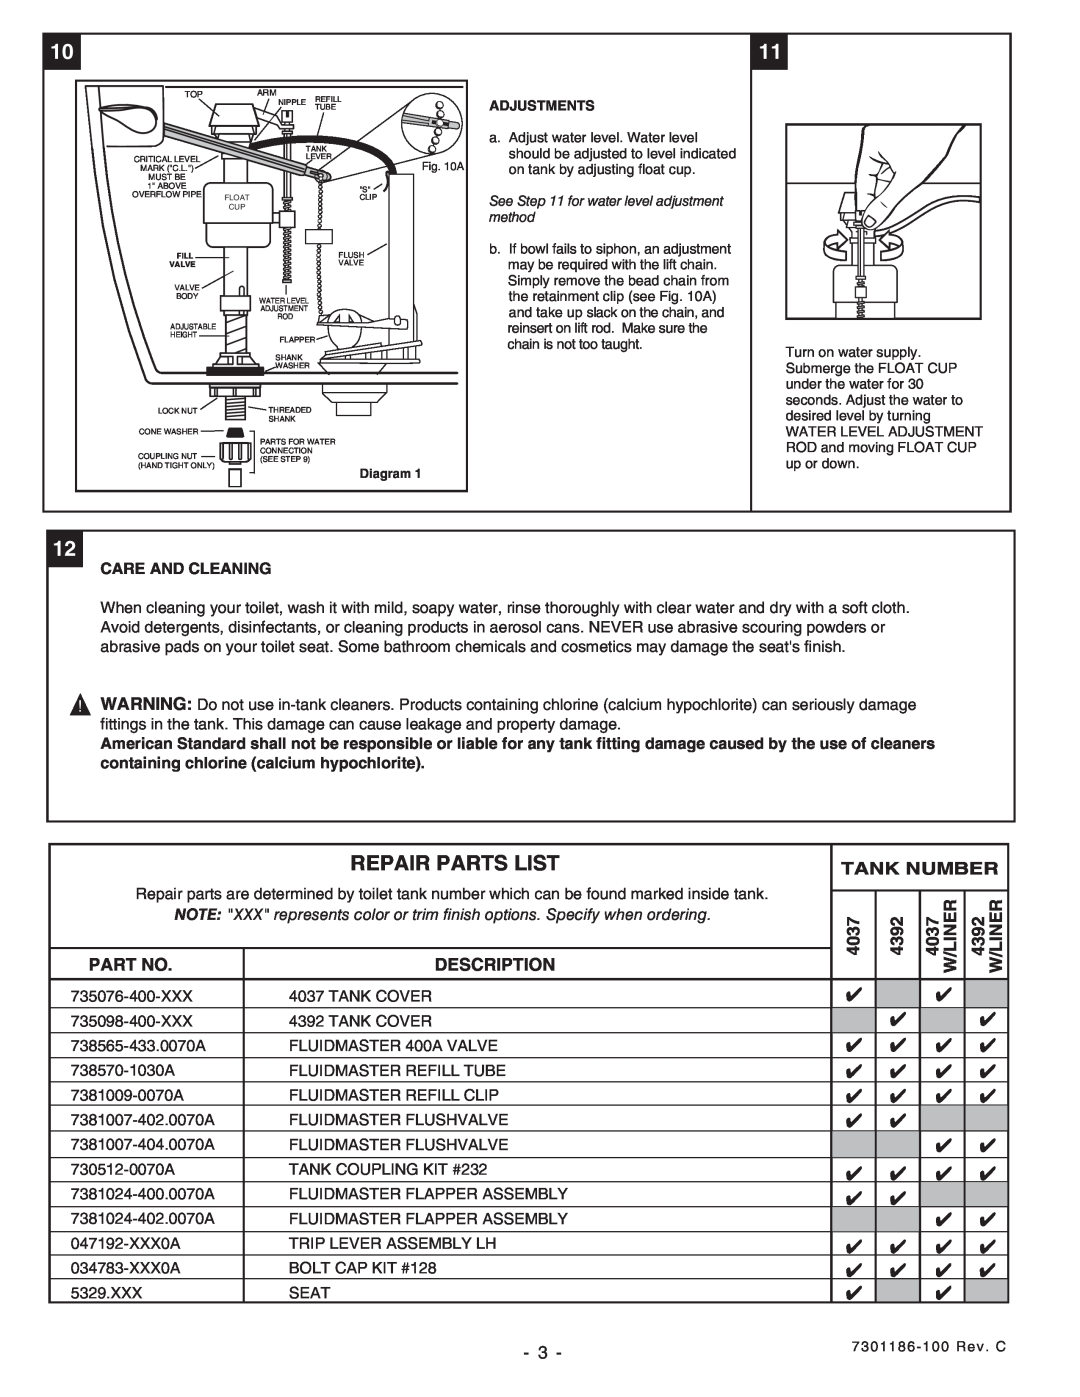 American Standard 2446 Repair Parts List, Description, Tank Number, 4037 W/LINER, 4392 W/LINER, Care And Cleaning 